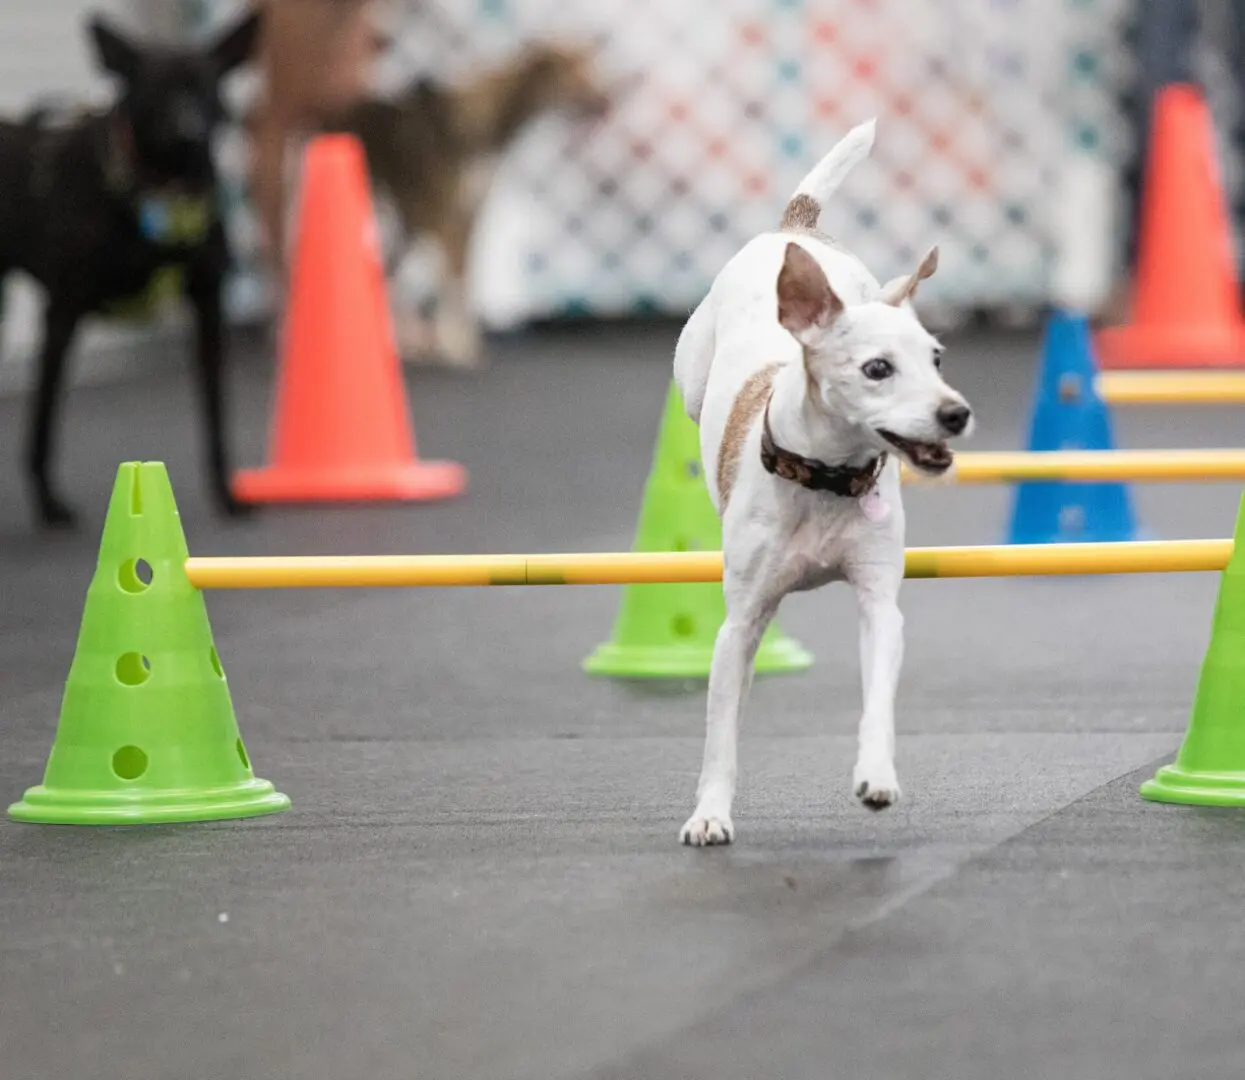 A white dog is jumping over cones in an obstacle course.